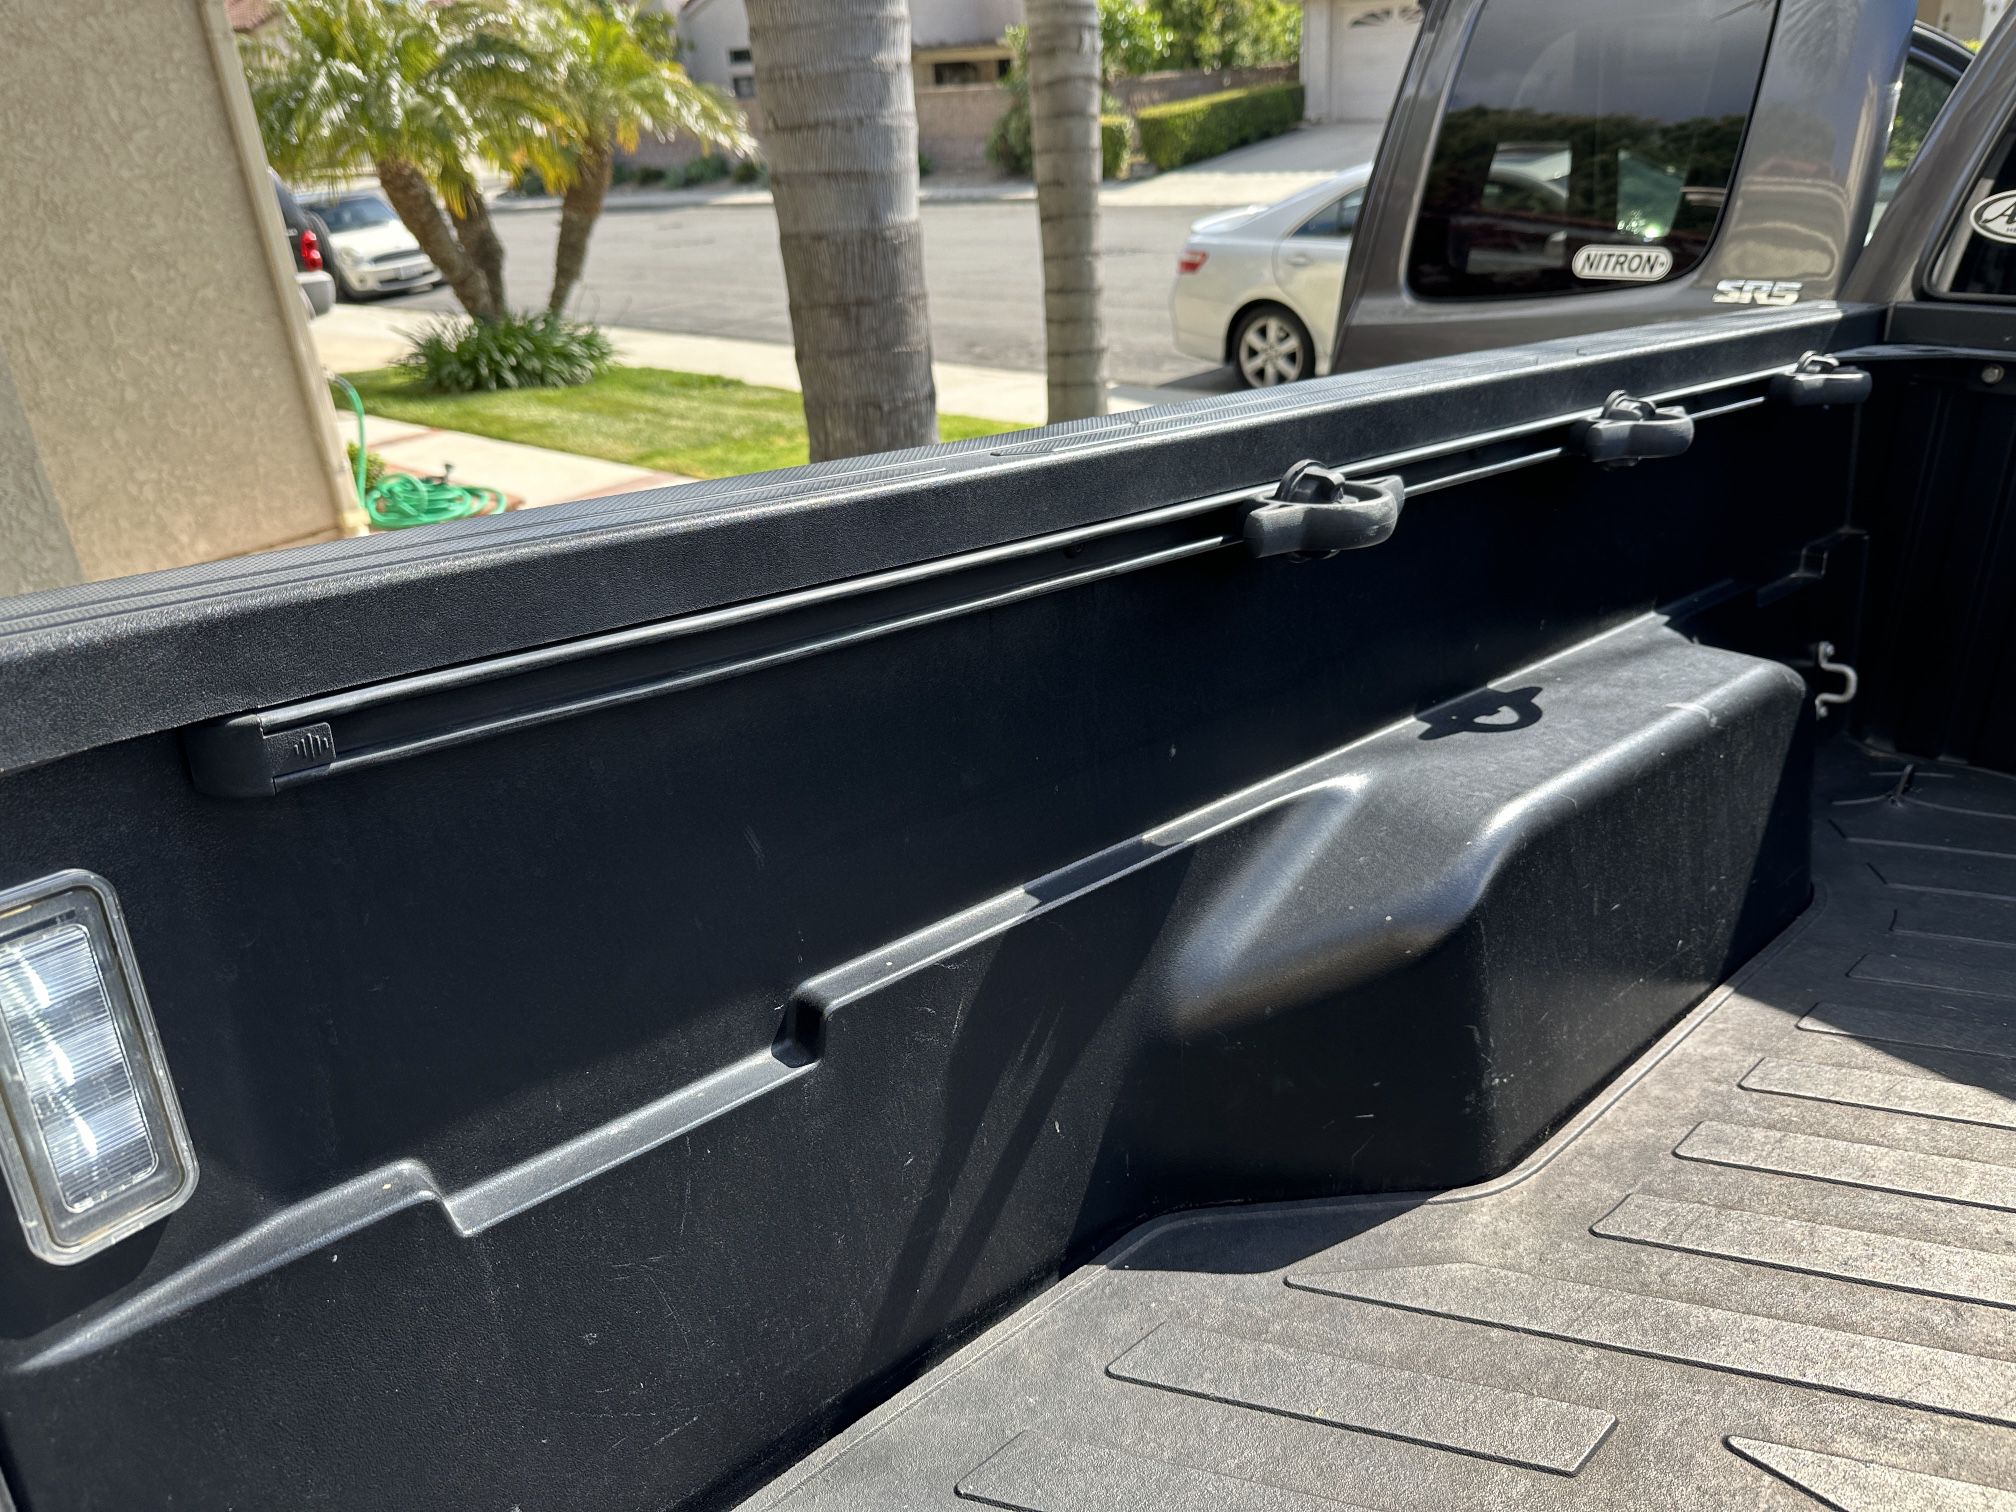 Toyota Tacoma bed rails and cleats